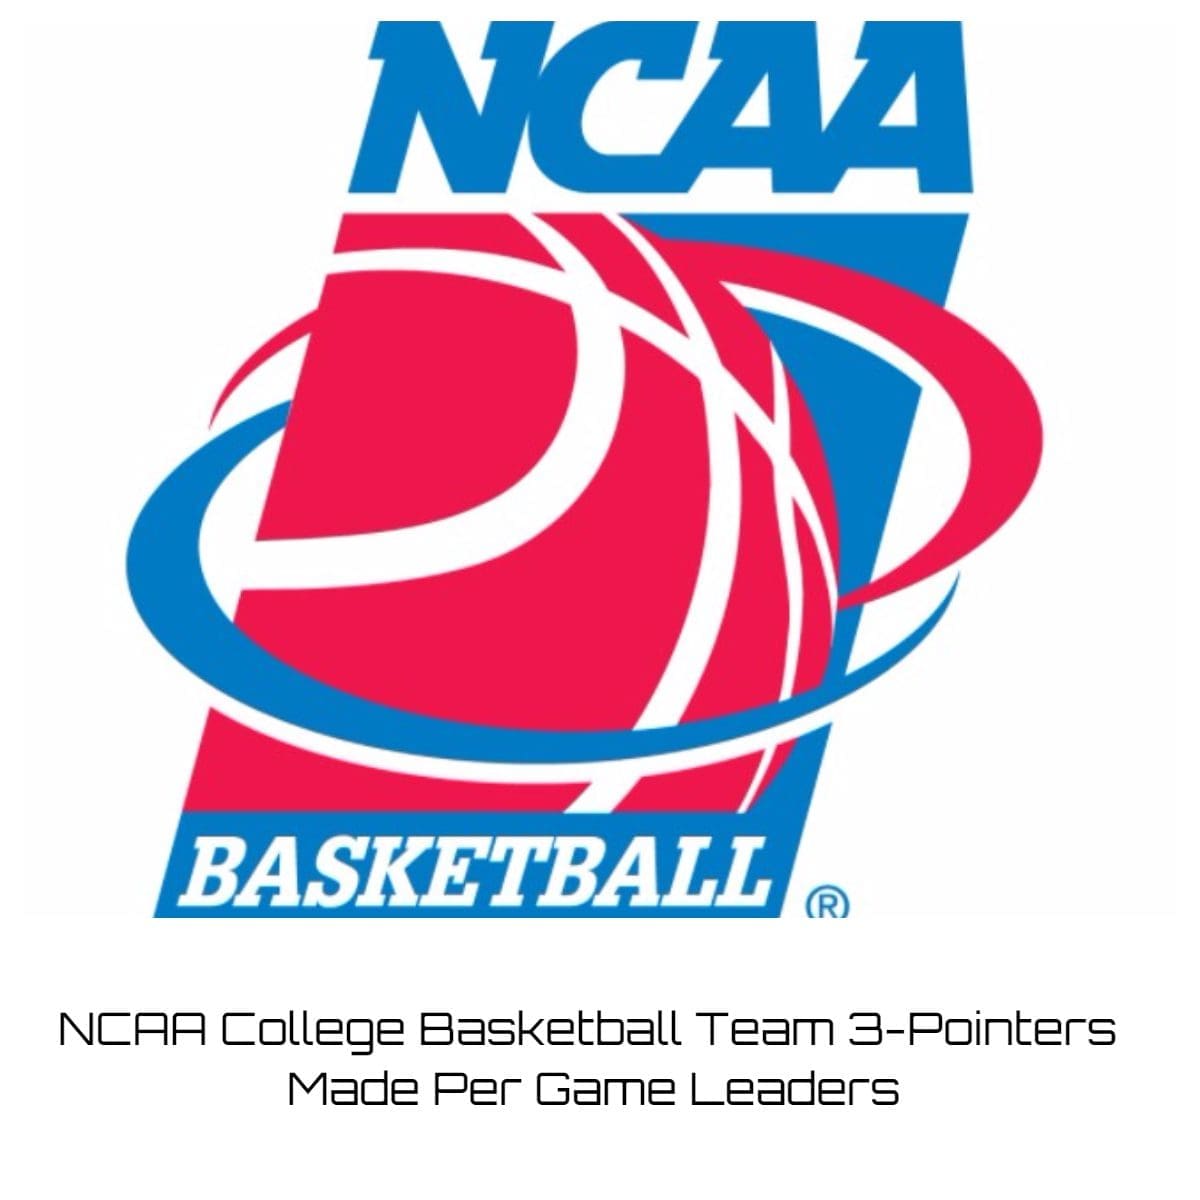 NCAA College Basketball Team 3-Pointers Made Per Game Leaders